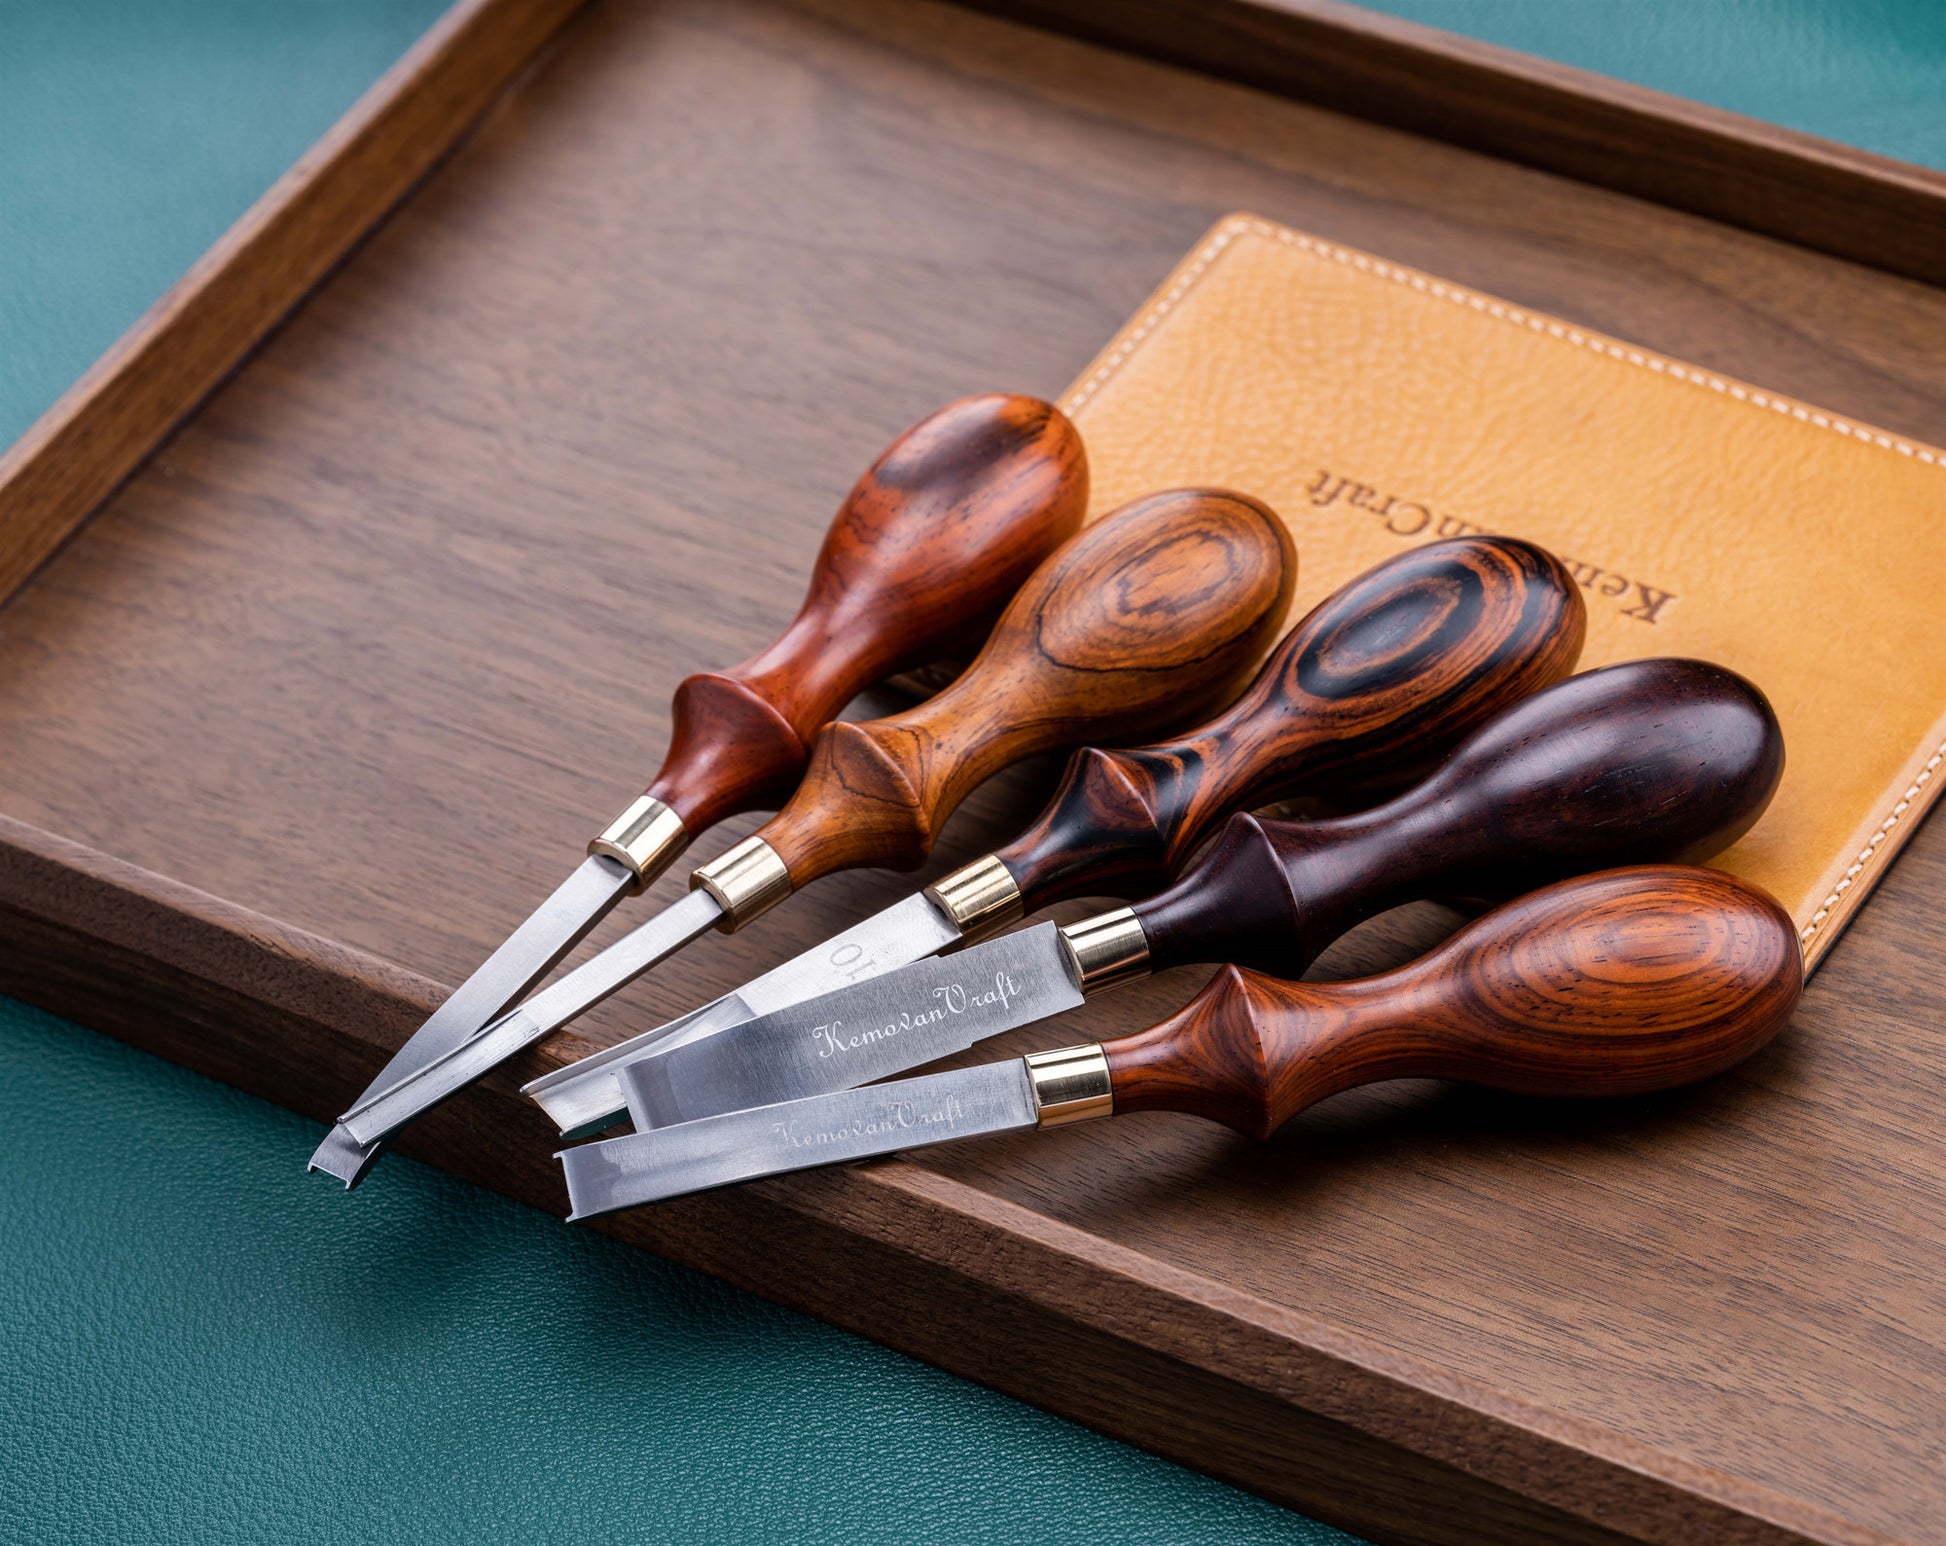 KemovanCraft Leather Craft Tools Customized Leather Working Tools